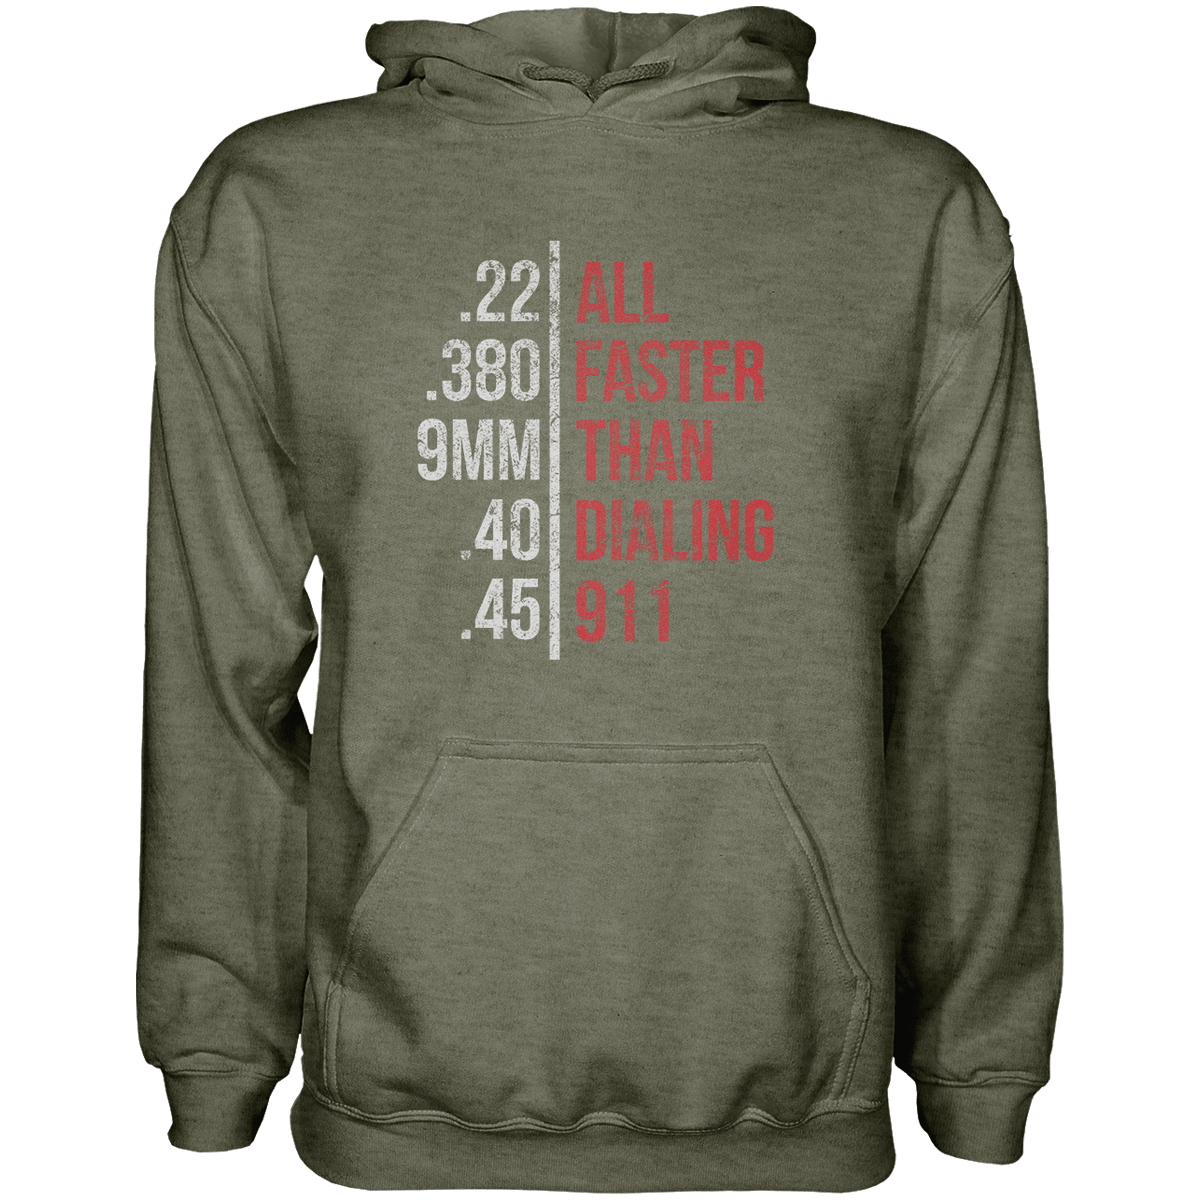 Faster Than Dailing 911 Hoodie - Greater Half